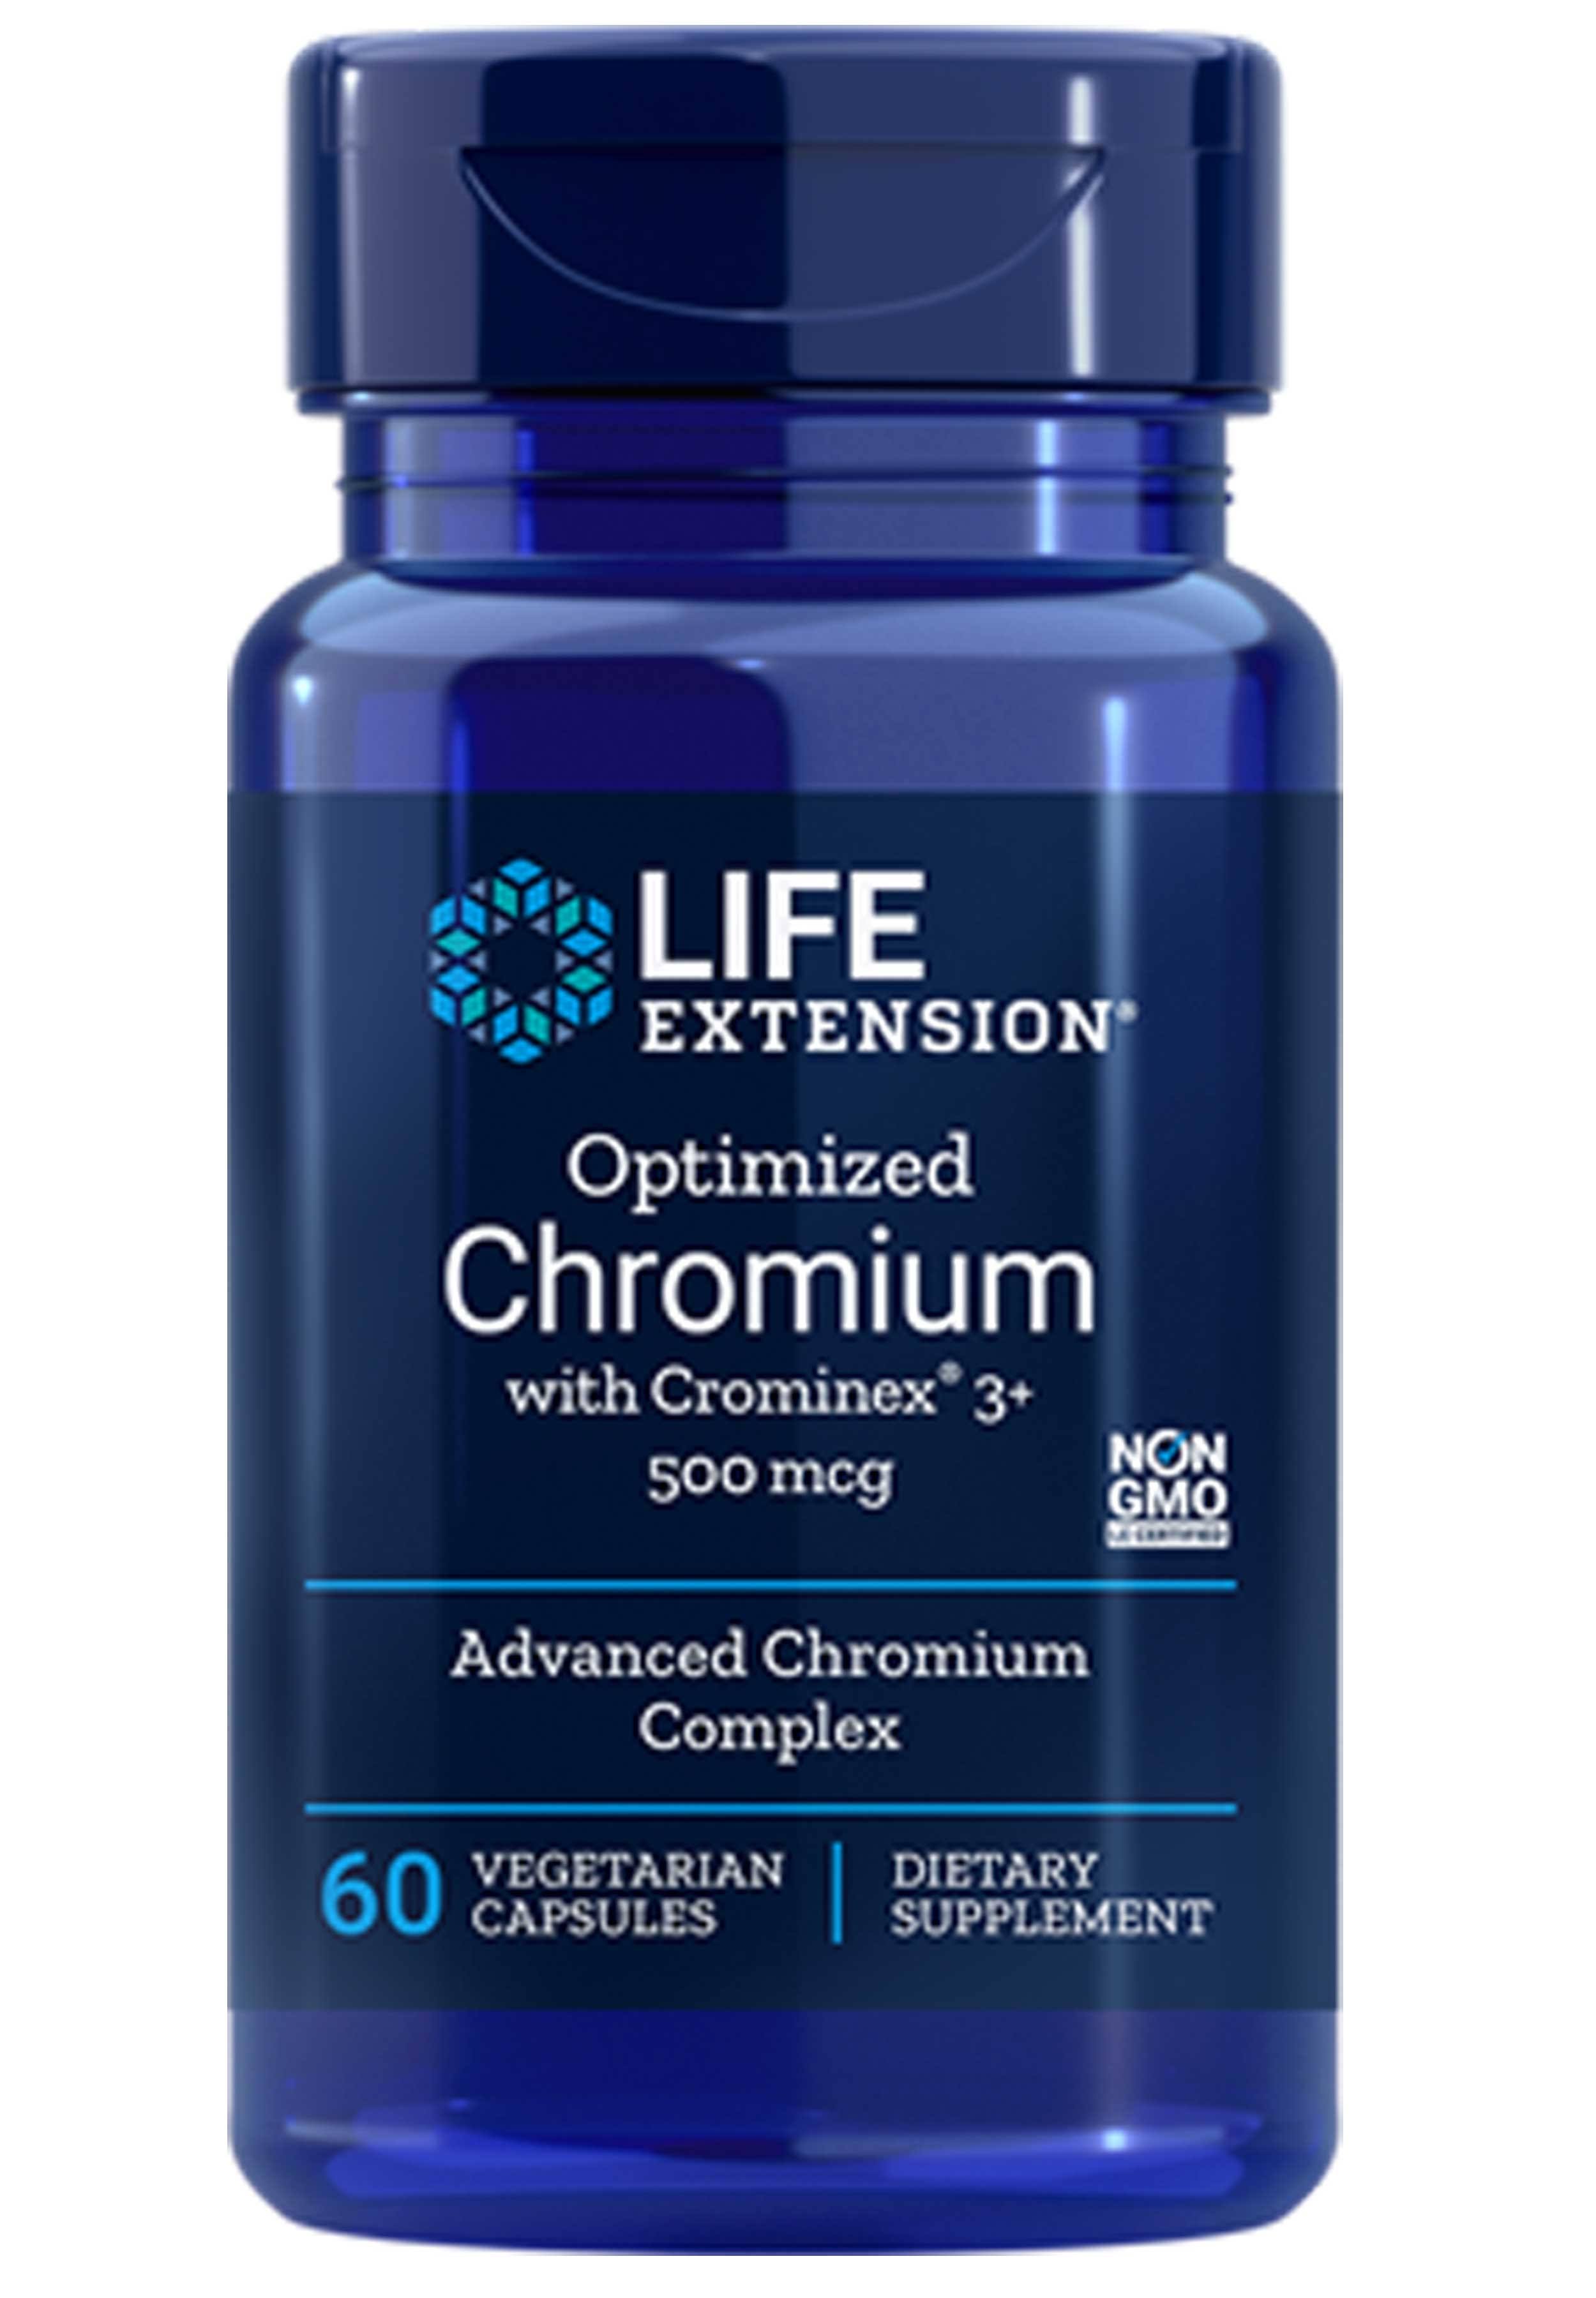 Life Extension Optimized Chromium with Crominex Dietary Supplement - 500mcg, 60ct